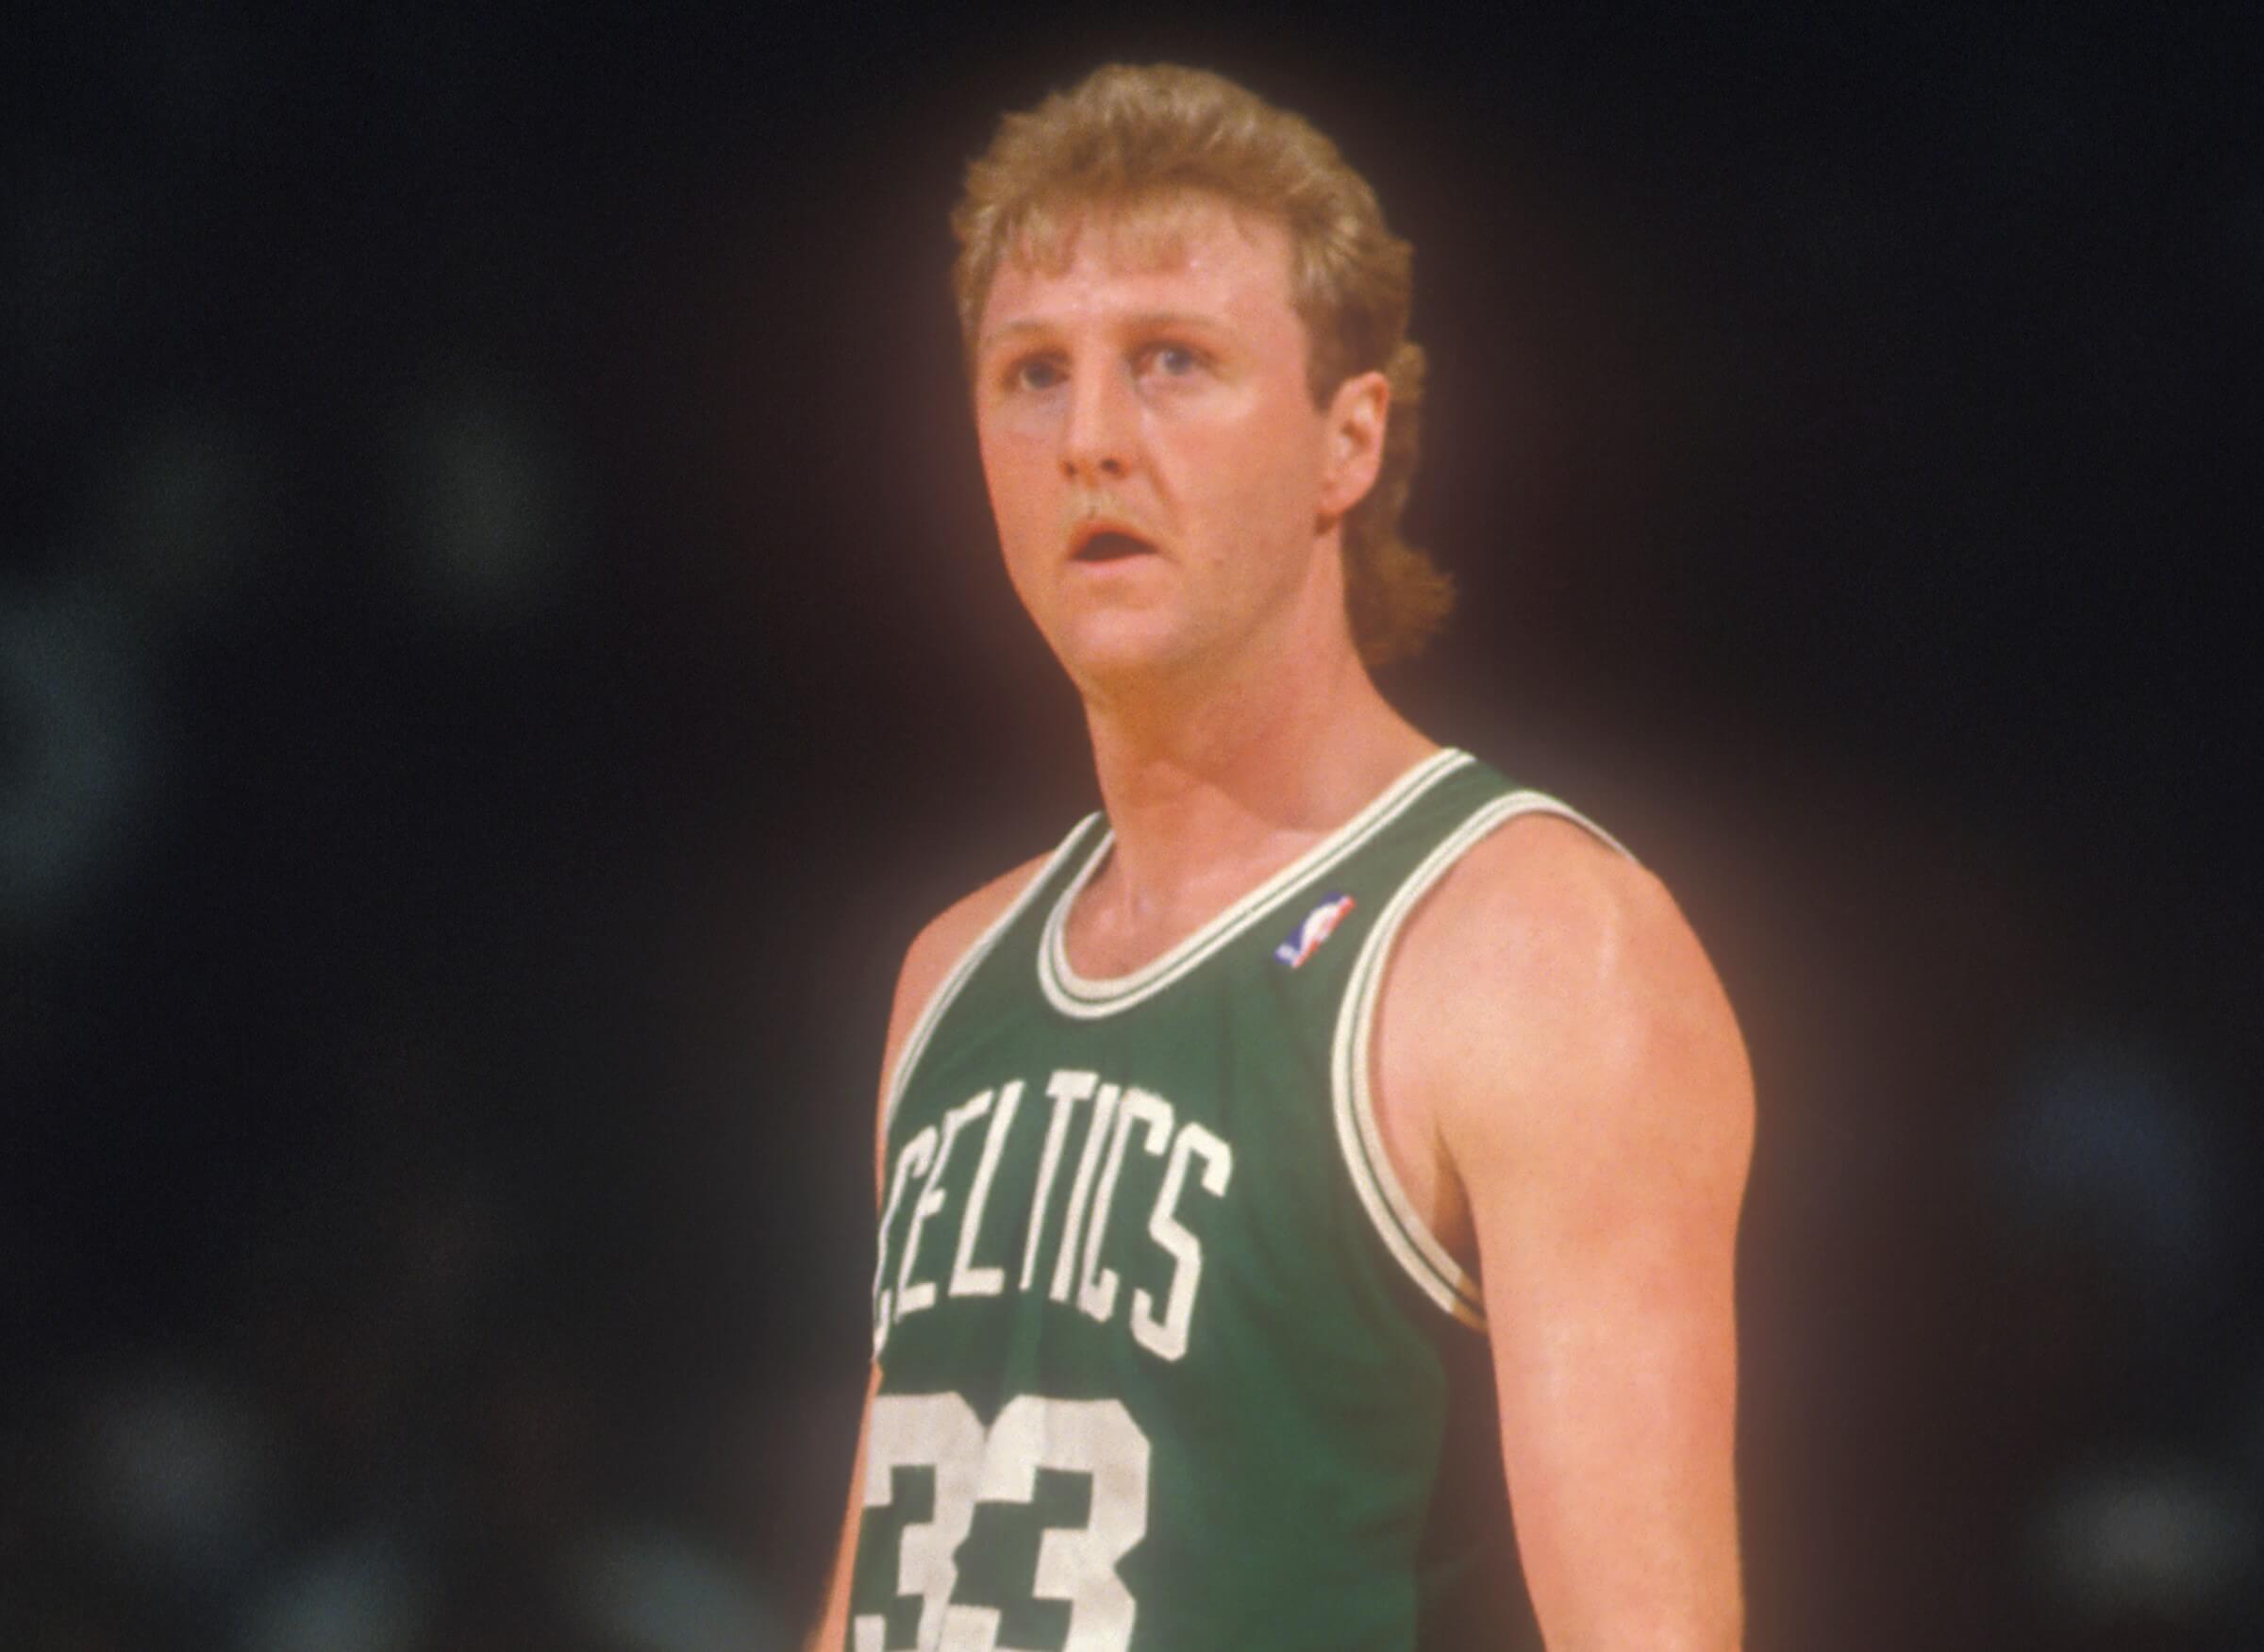 Larry Bird of the Boston Celtics looks on during a basketball game against the Washington Bullets.